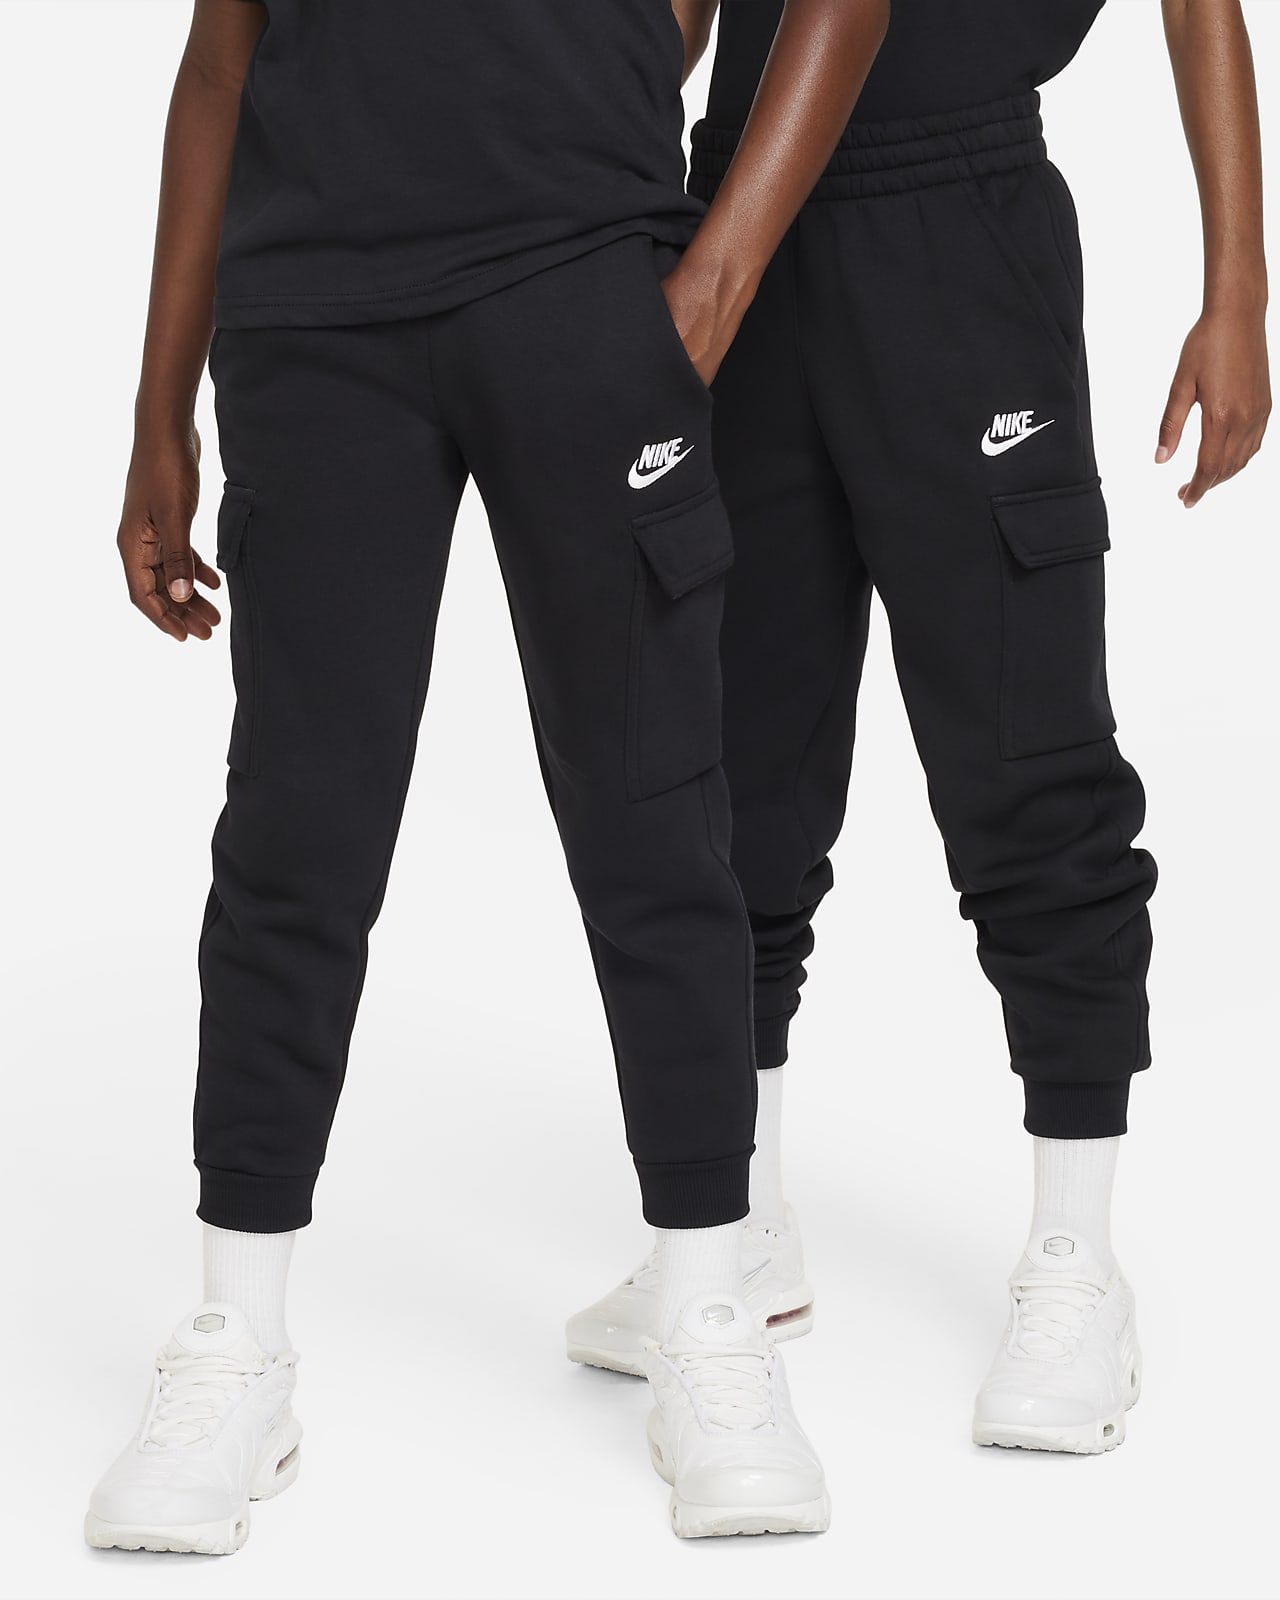 These Super Cute Nike Joggers Are Perfect For Year-Round Wear